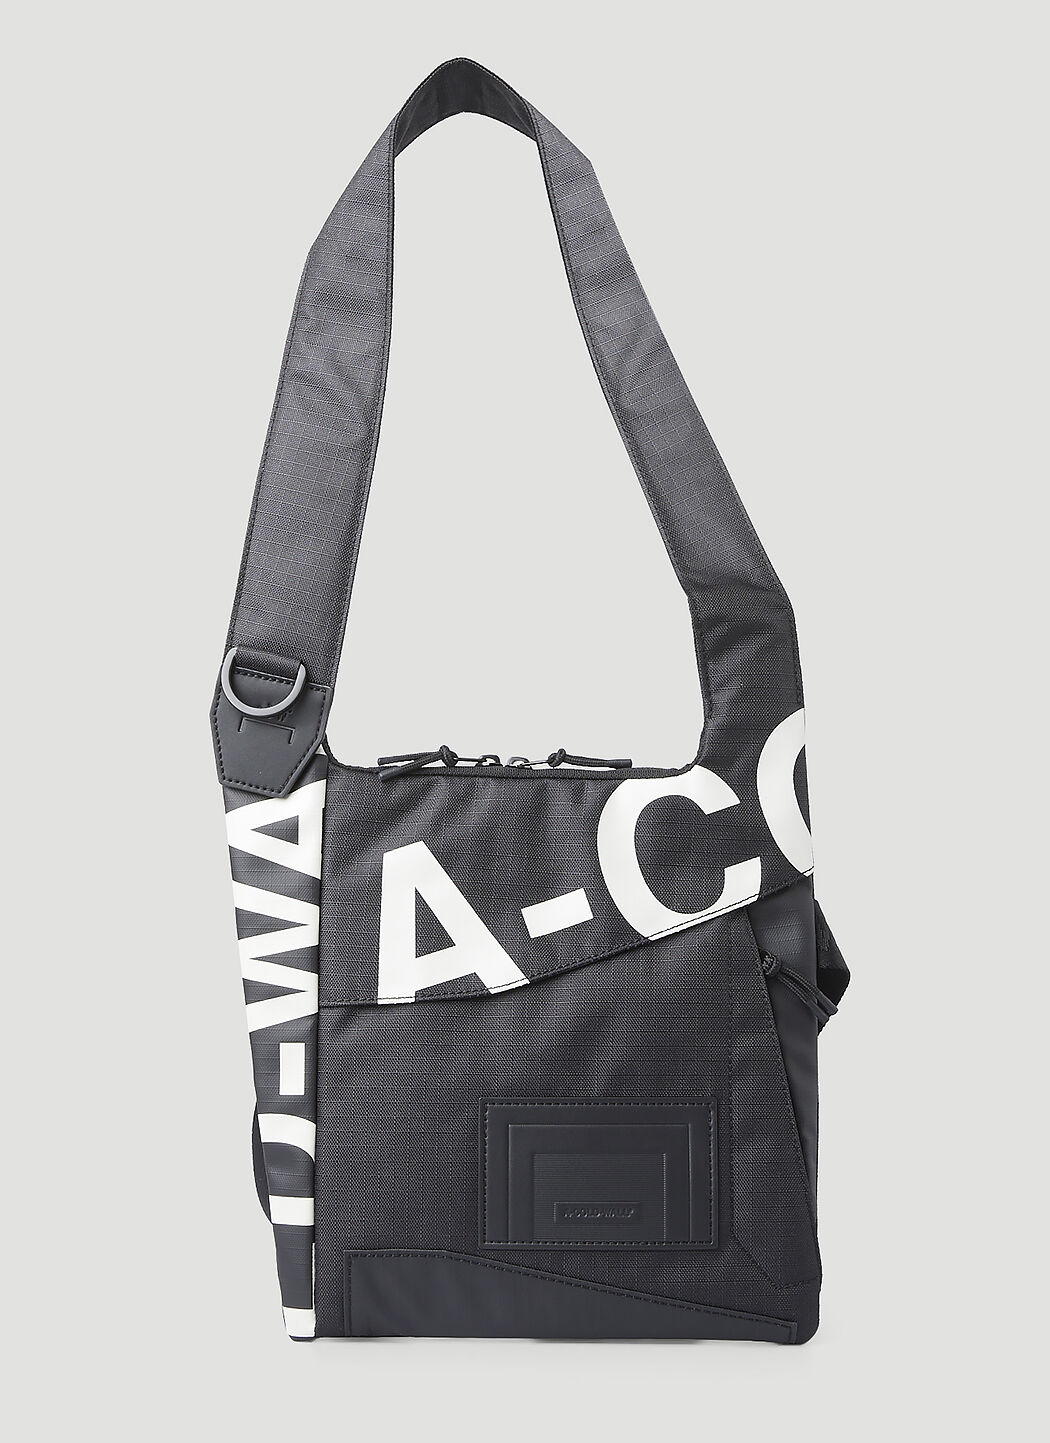 A-COLD-WALL* Typographic Ripstop Crossbody Bag in Black | LN-CC®